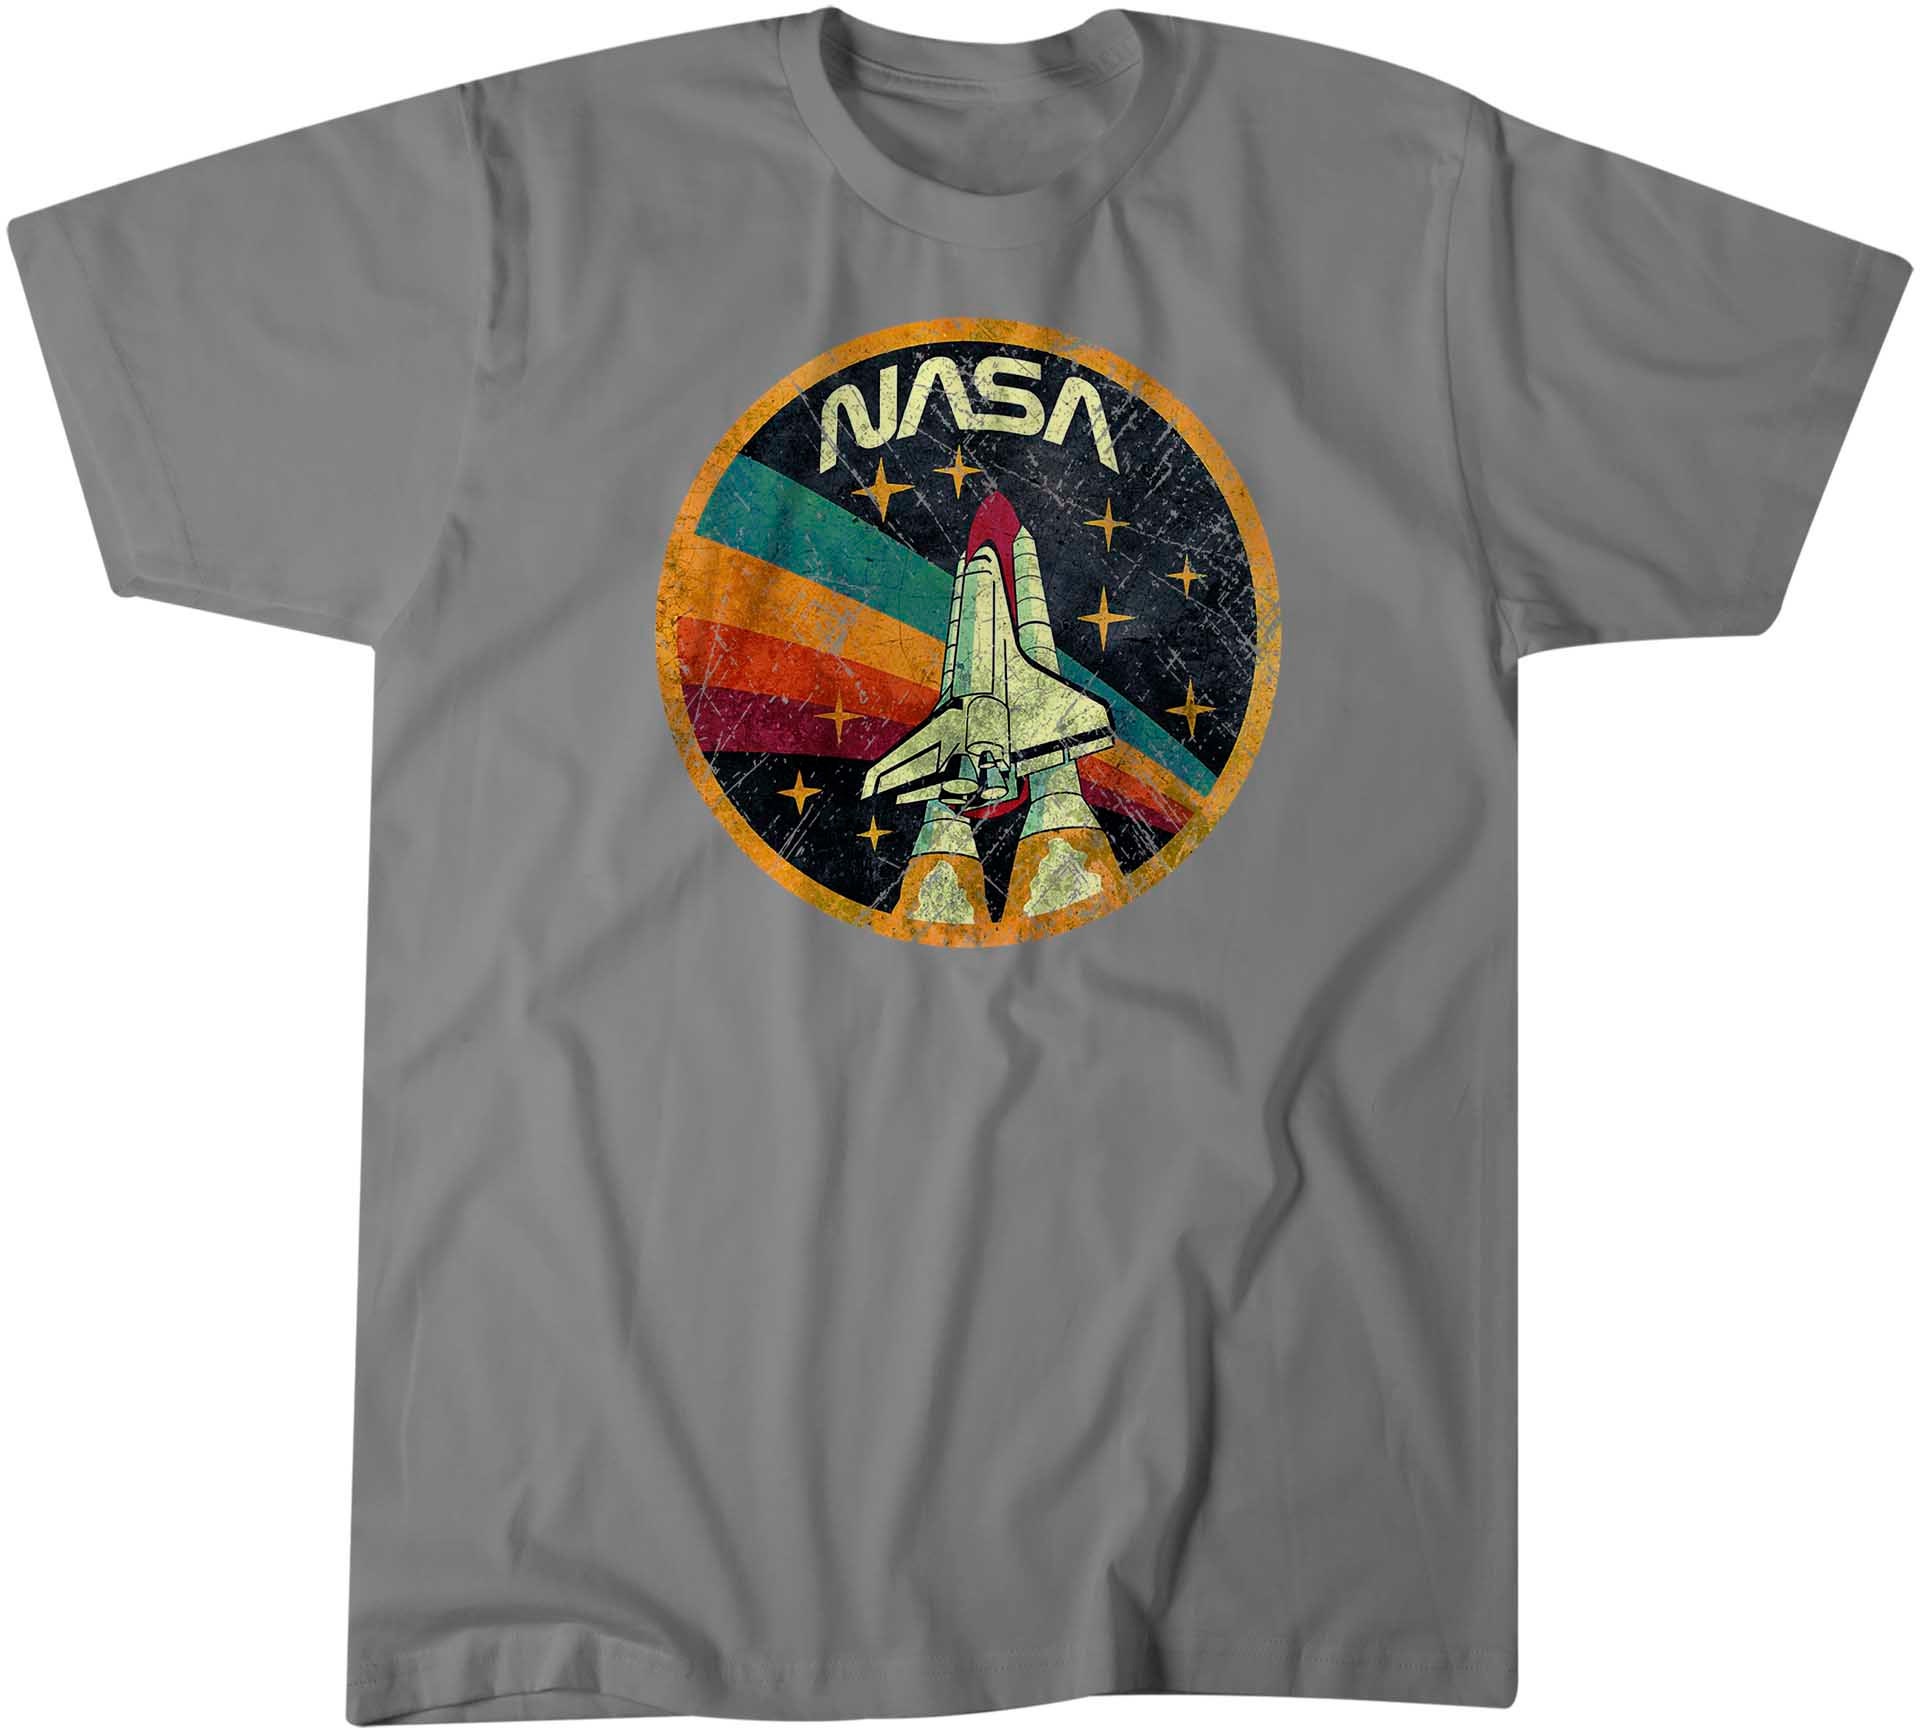 Discover NASA T Shirt Cool Gift Distressed Logo Space Agency Vintage Tee